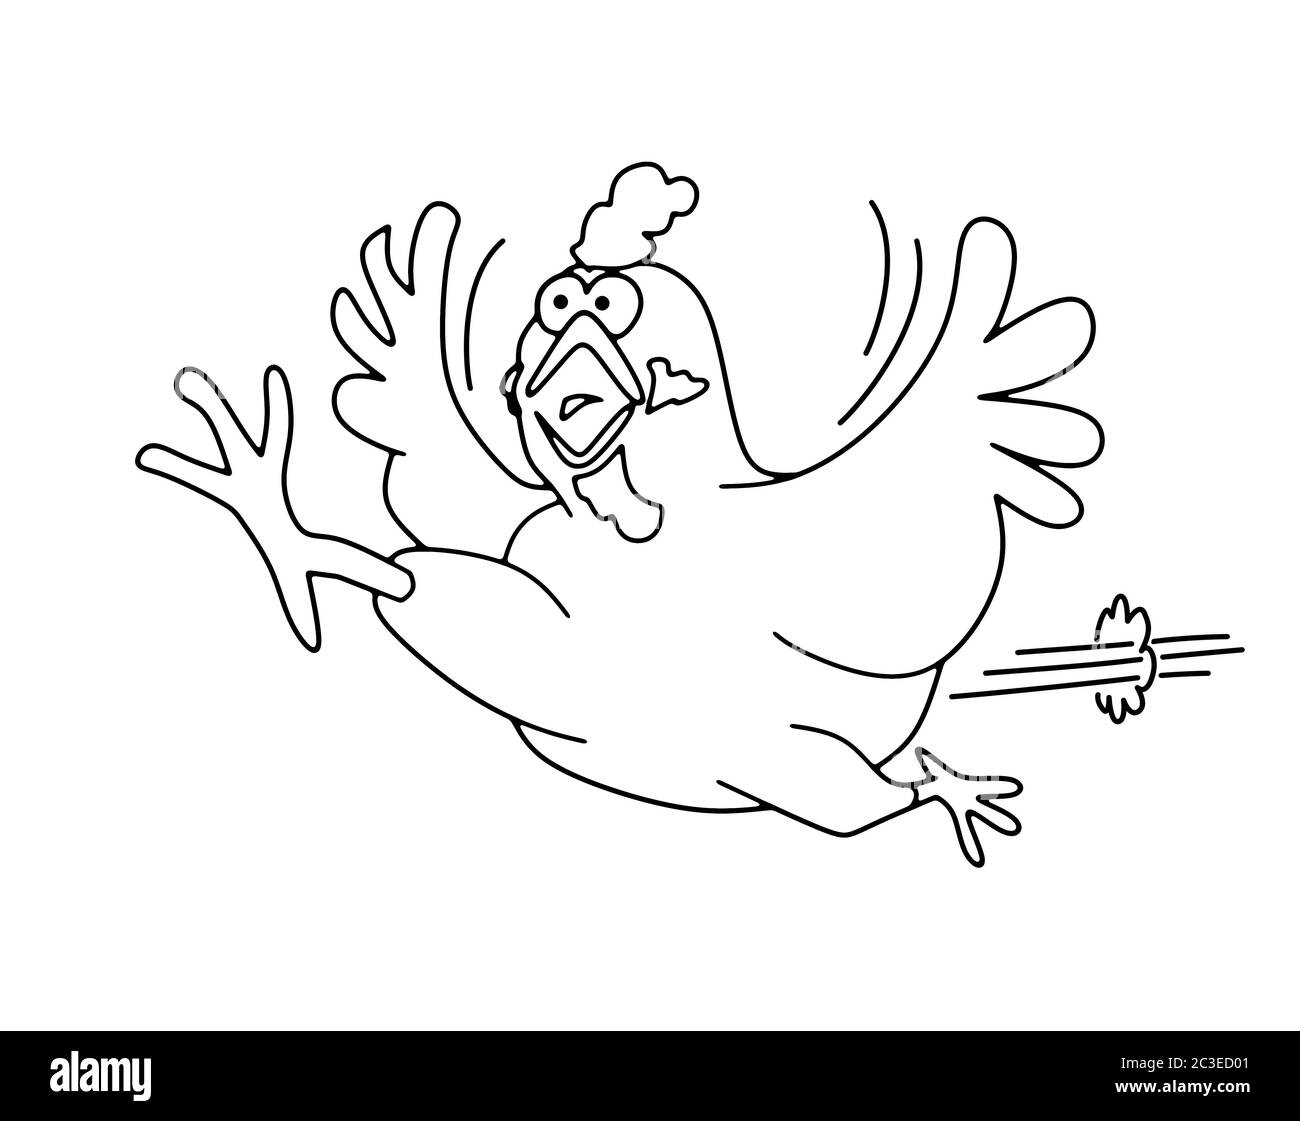 running chicken outline graphic for colouring books Stock Photo